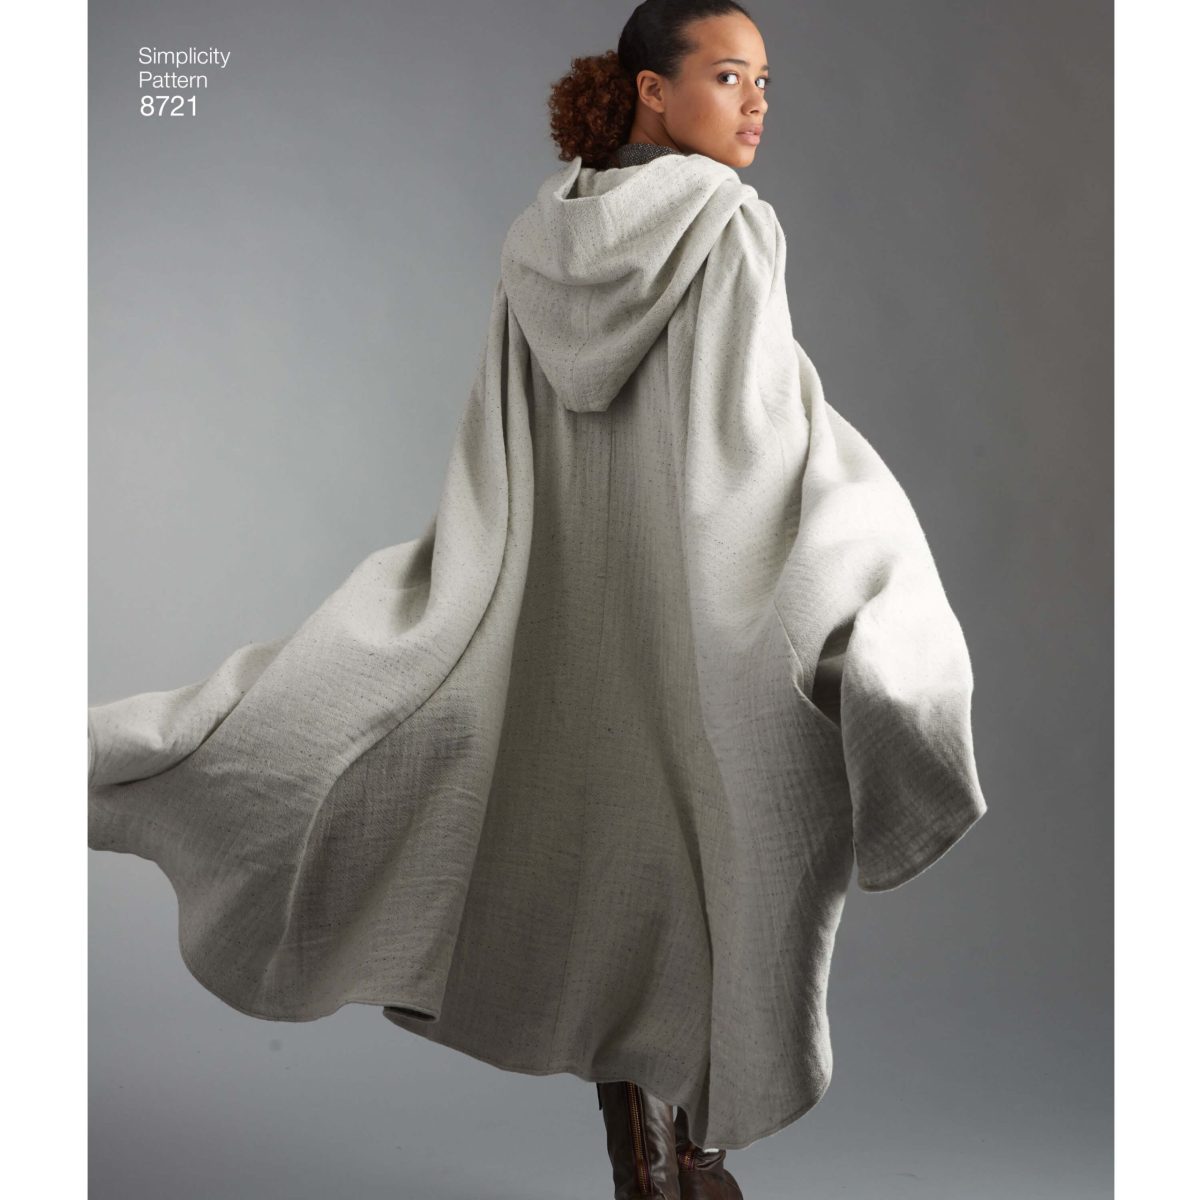 Simplicity Sewing Pattern 8721 Misses Capes